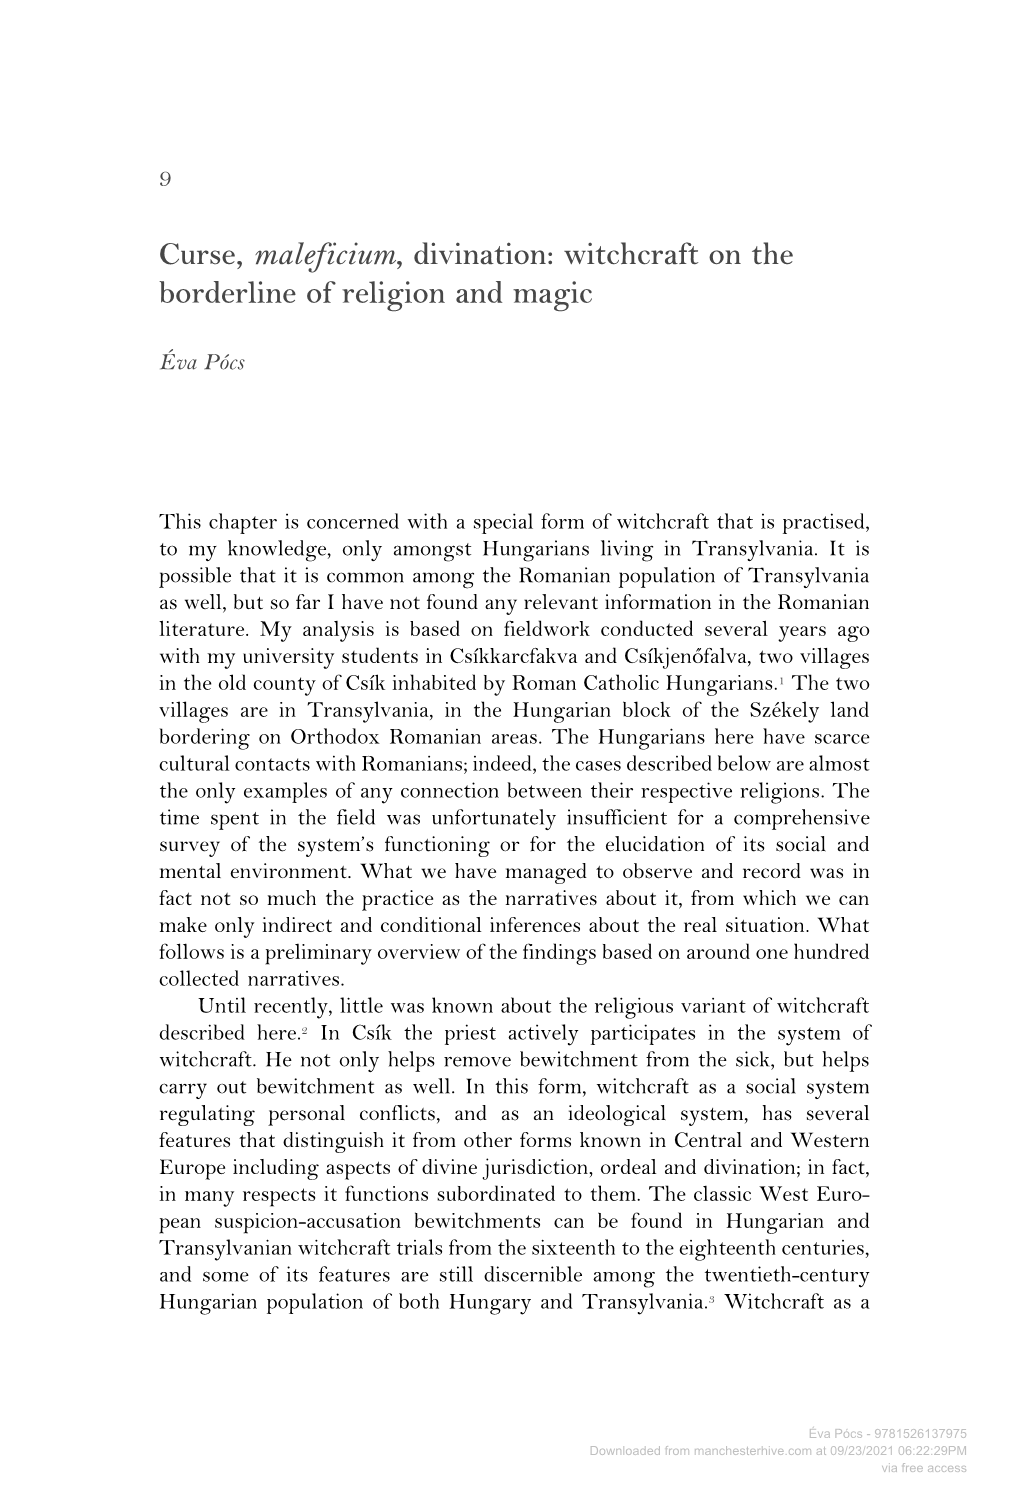 Curse, Maleficium, Divination: Witchcraft on the Borderline of Religion and Magic